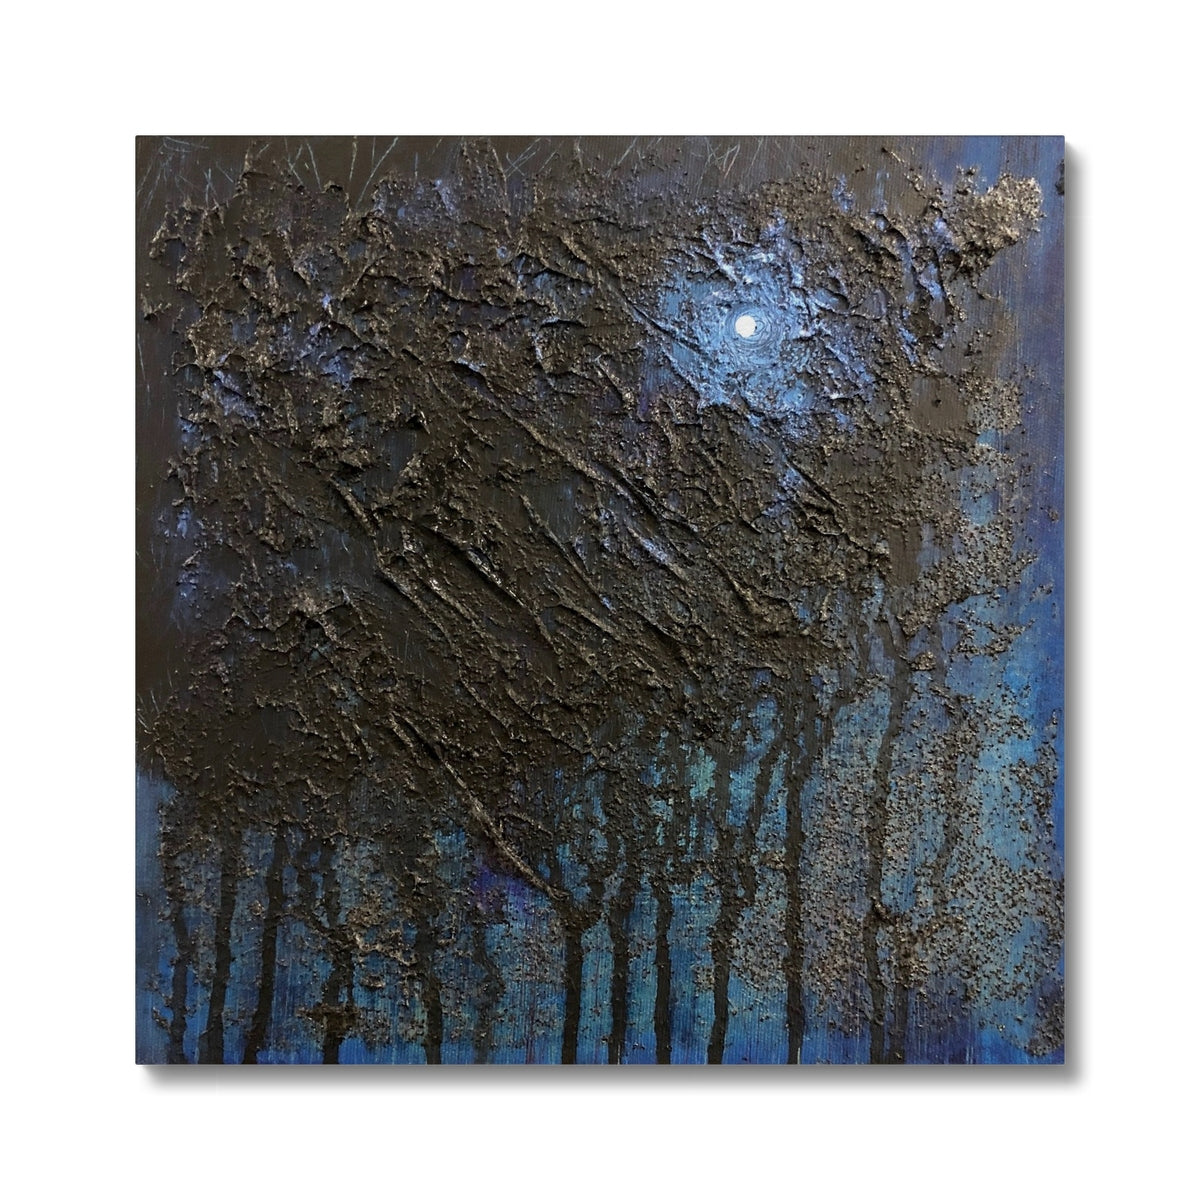 The Blue Moon Wood Abstract Painting | Canvas From Scotland-Contemporary Stretched Canvas Prints-Abstract & Impressionistic Art Gallery-24"x24"-Paintings, Prints, Homeware, Art Gifts From Scotland By Scottish Artist Kevin Hunter